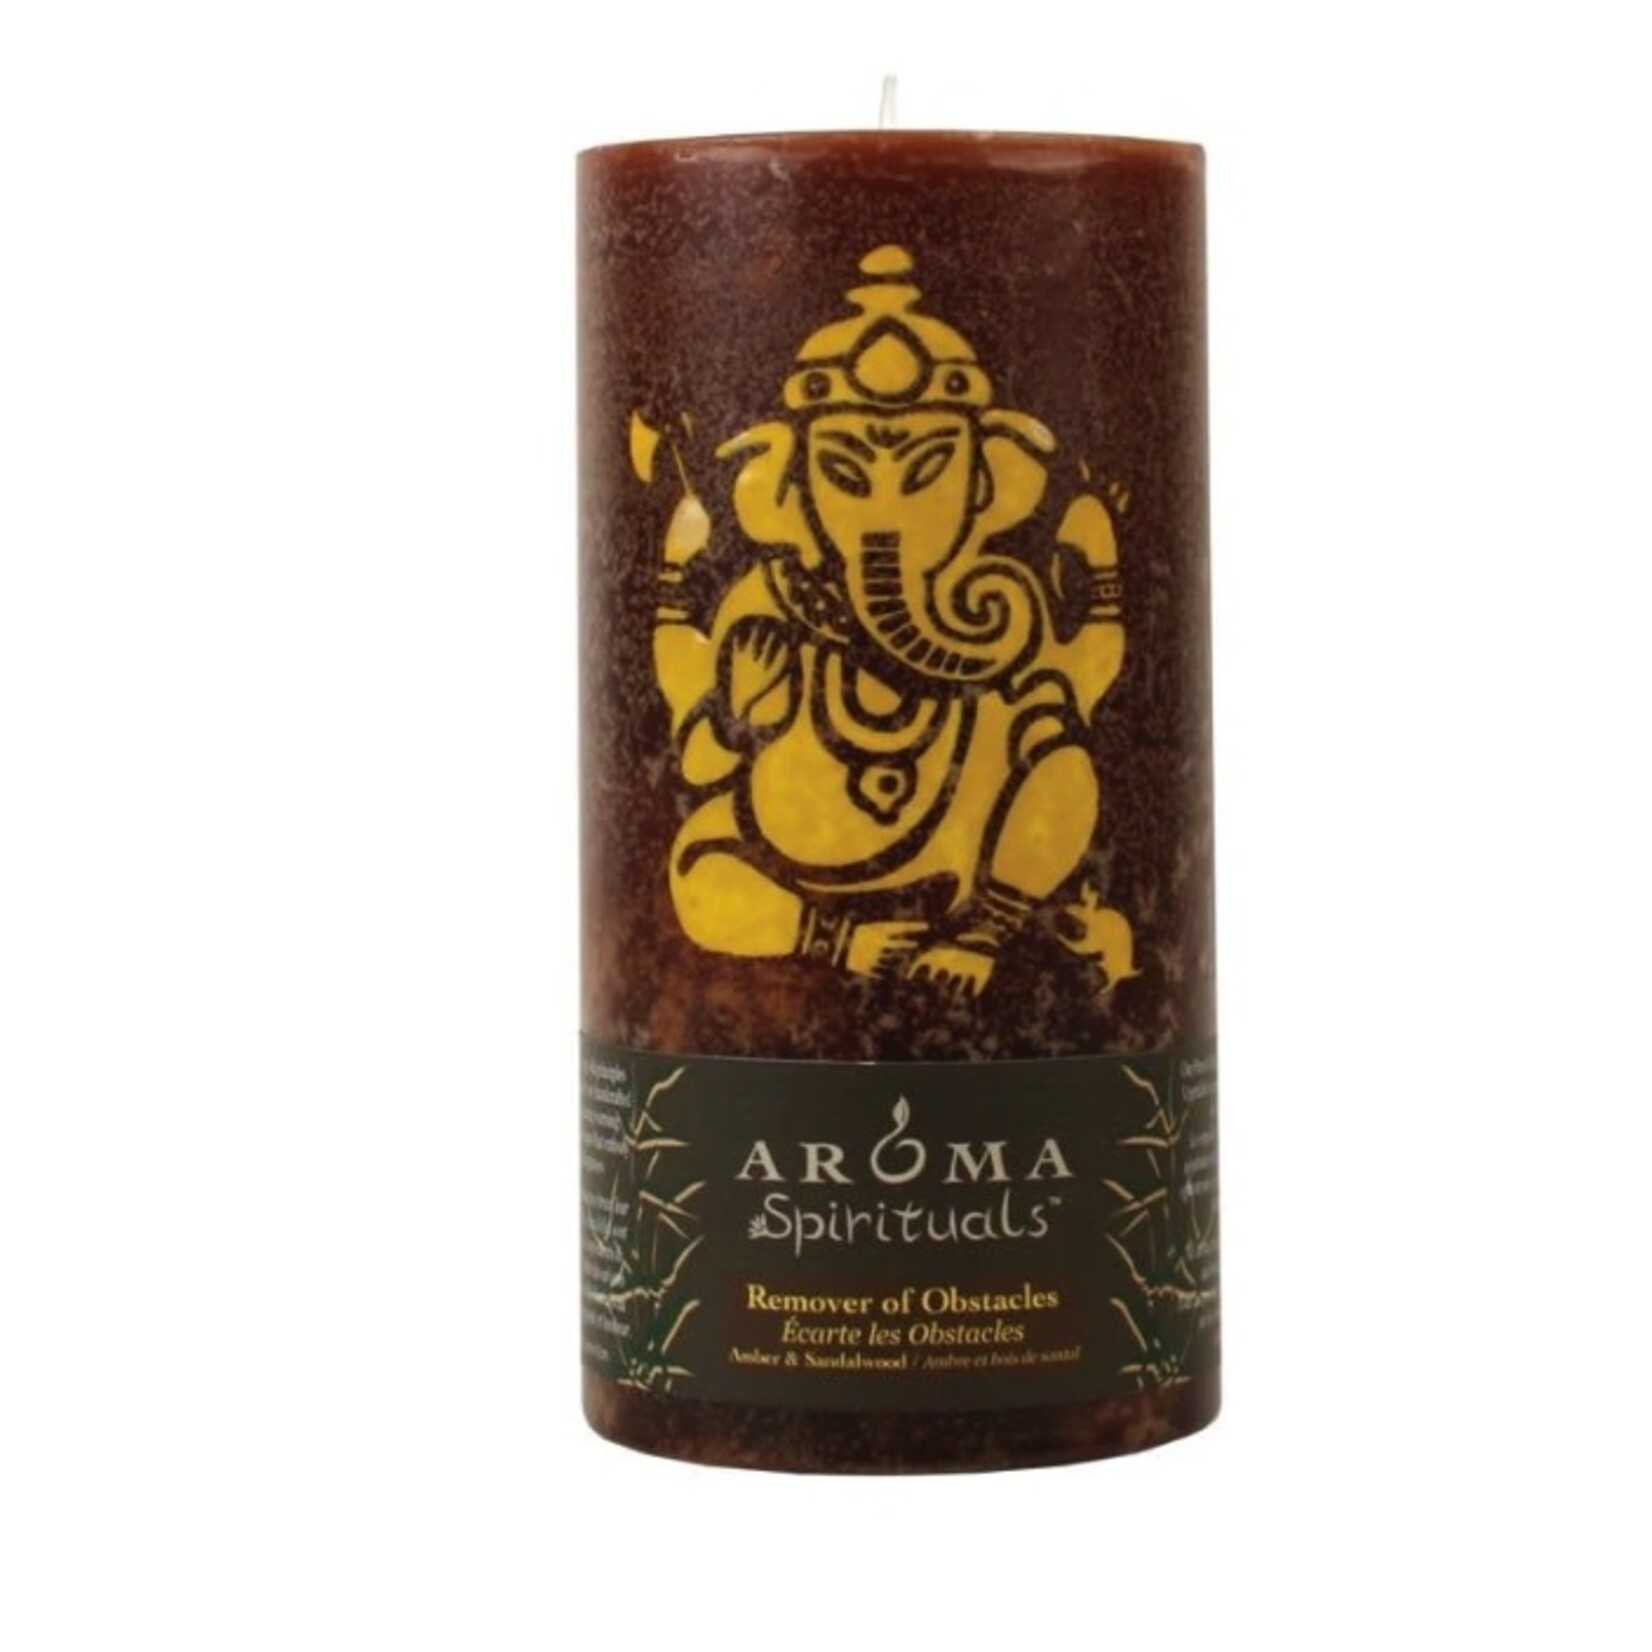 Aroma Spirituals AROMA SPIRITUALS 3X6 REMOVER OF OBSTACLES